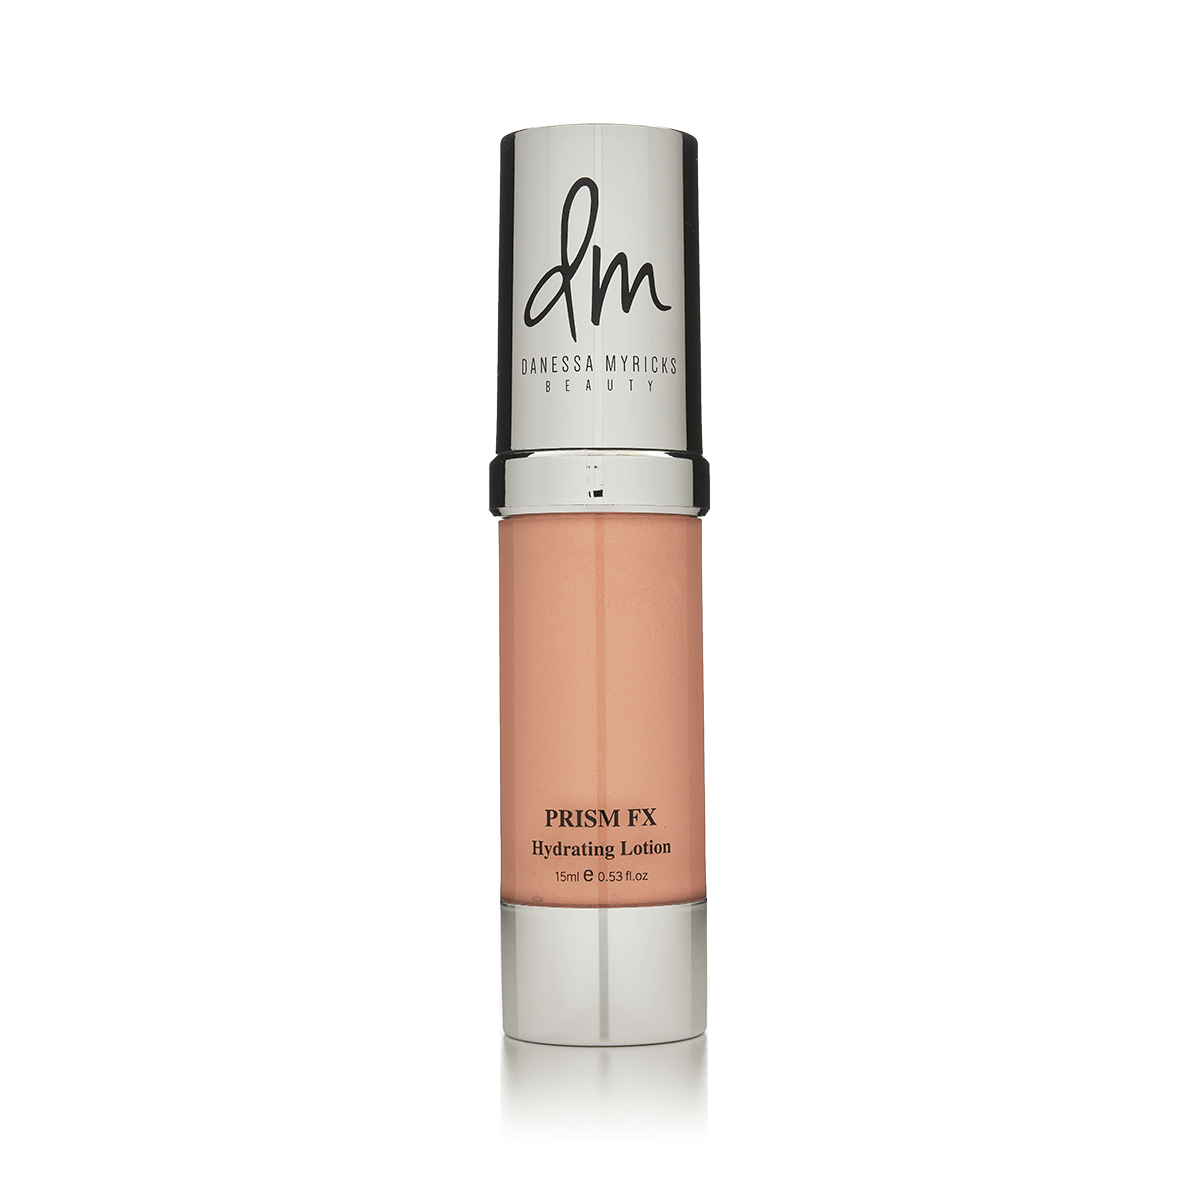 Prism FX Hydrating Lotion - Peach